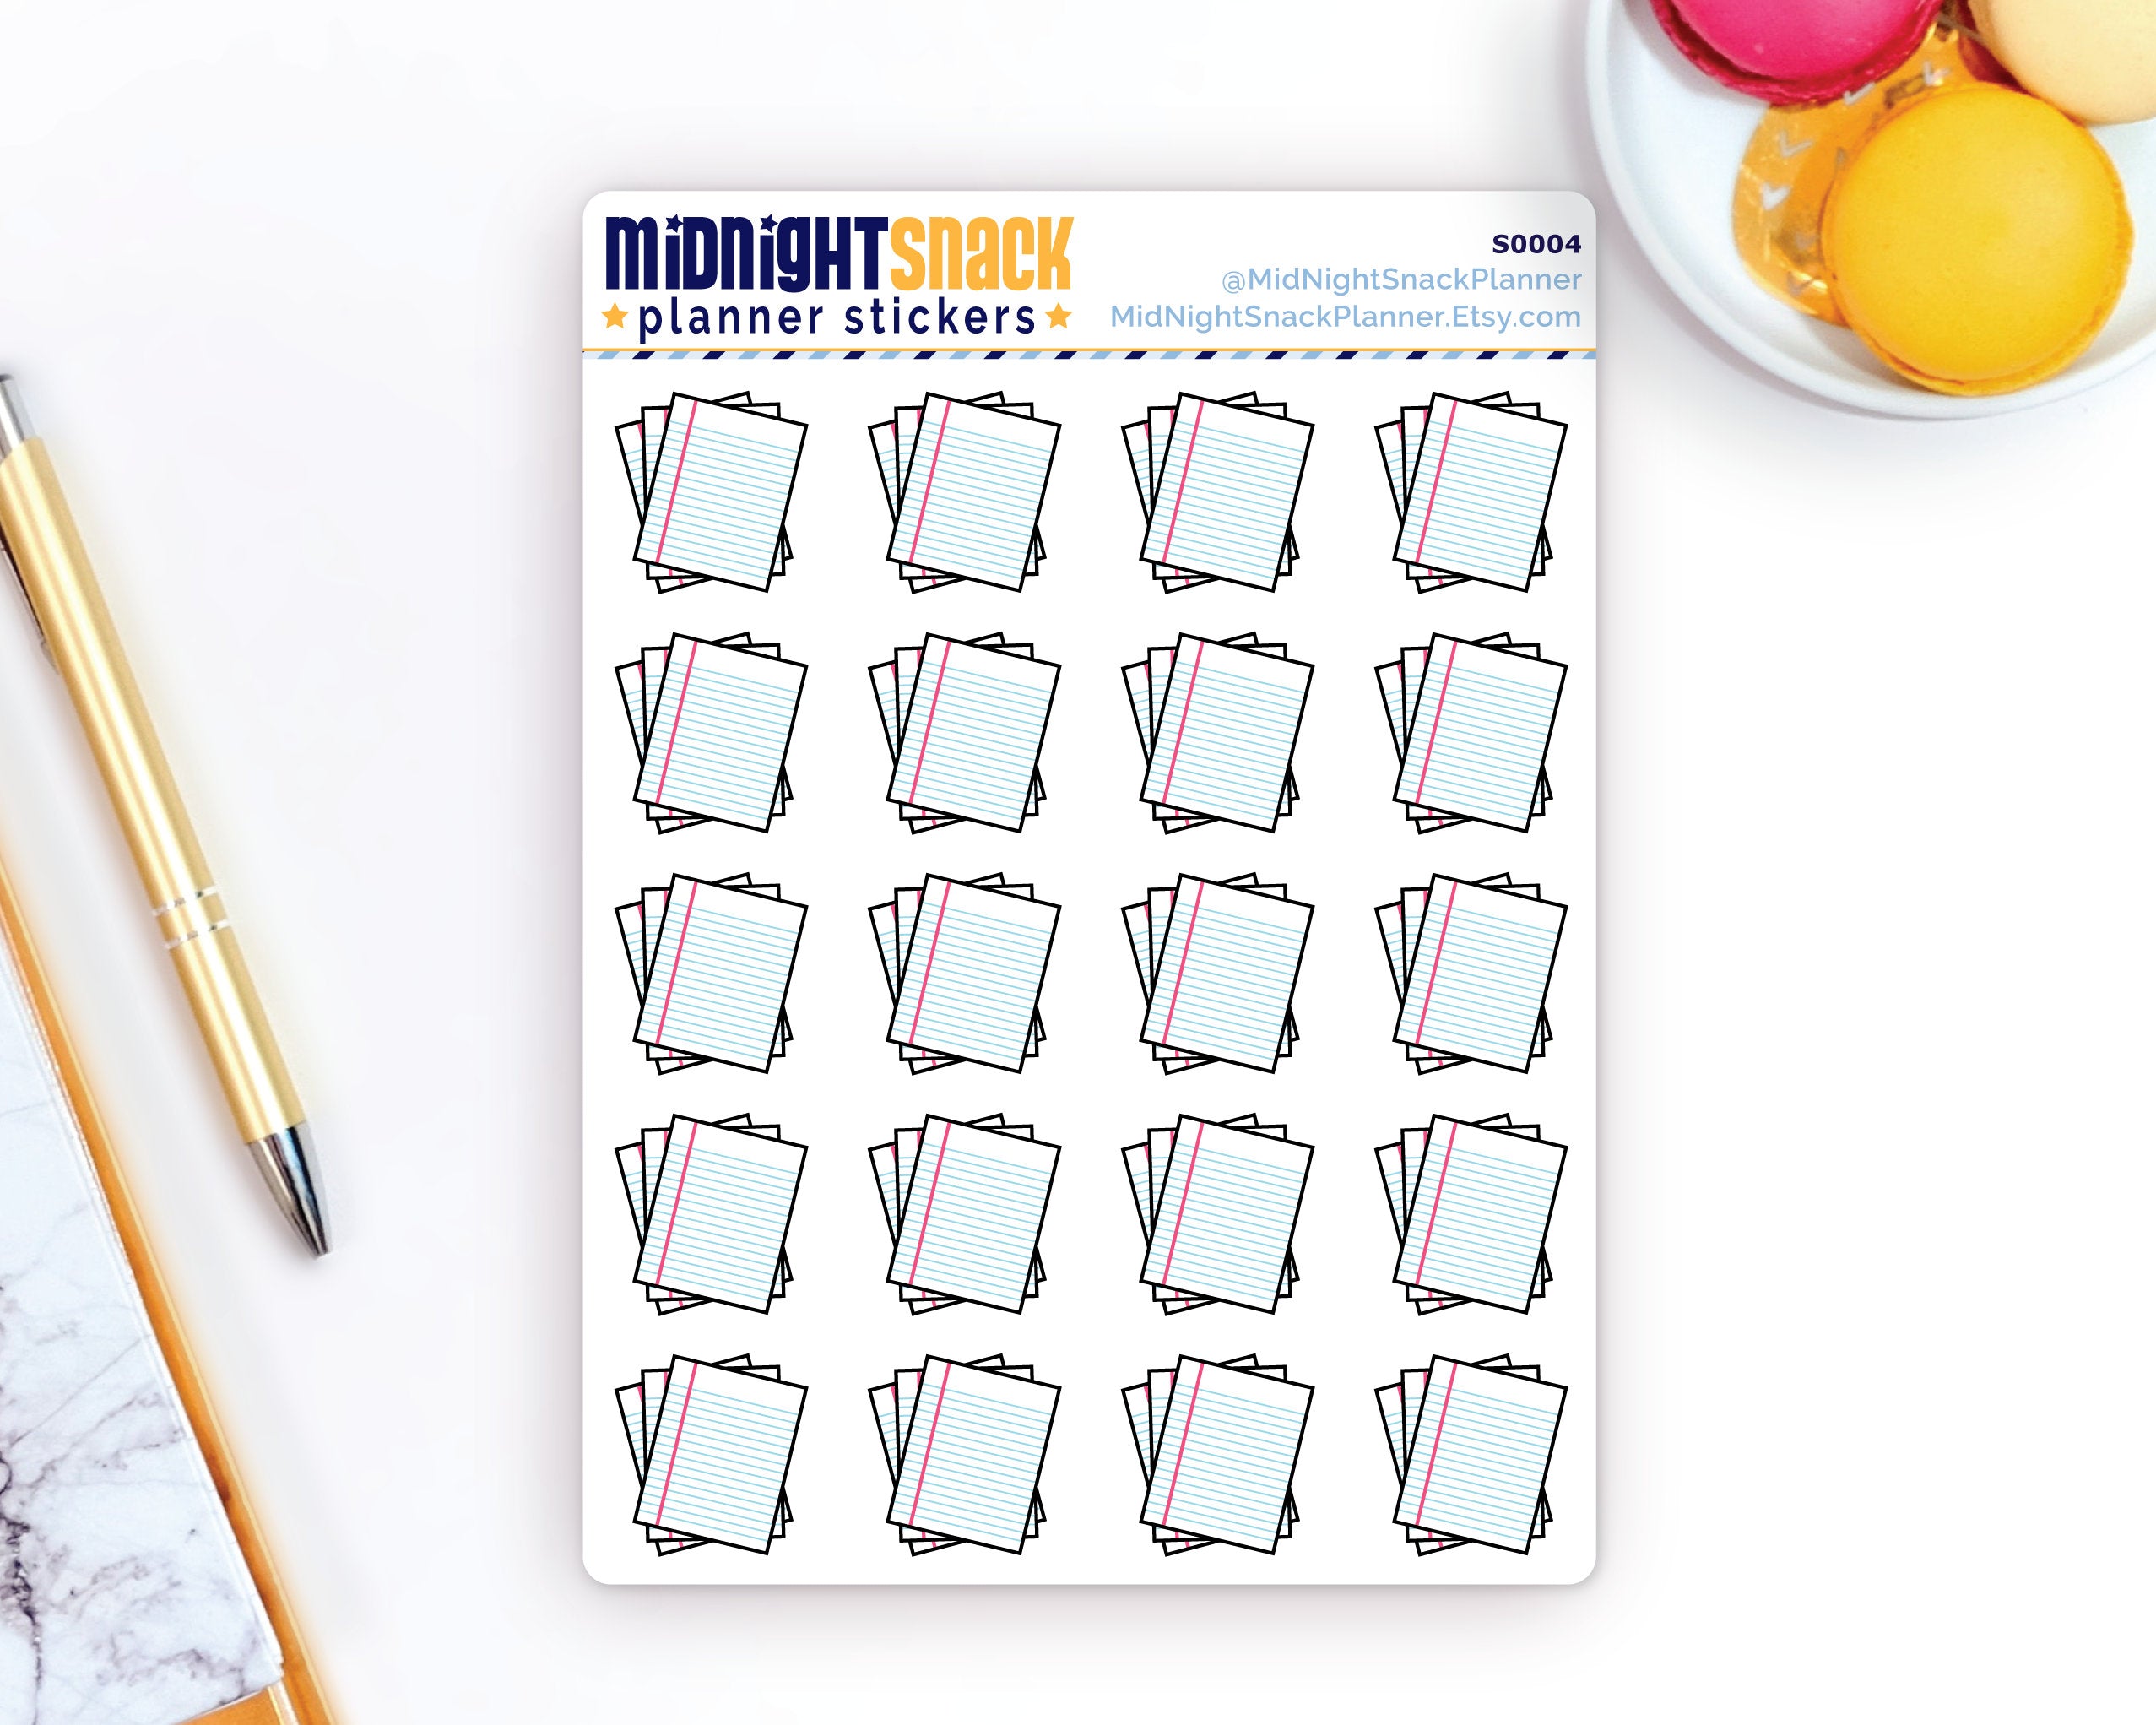 Lined Paper Icon: Homework Assignment Planner Stickers Midnight Snack Planner